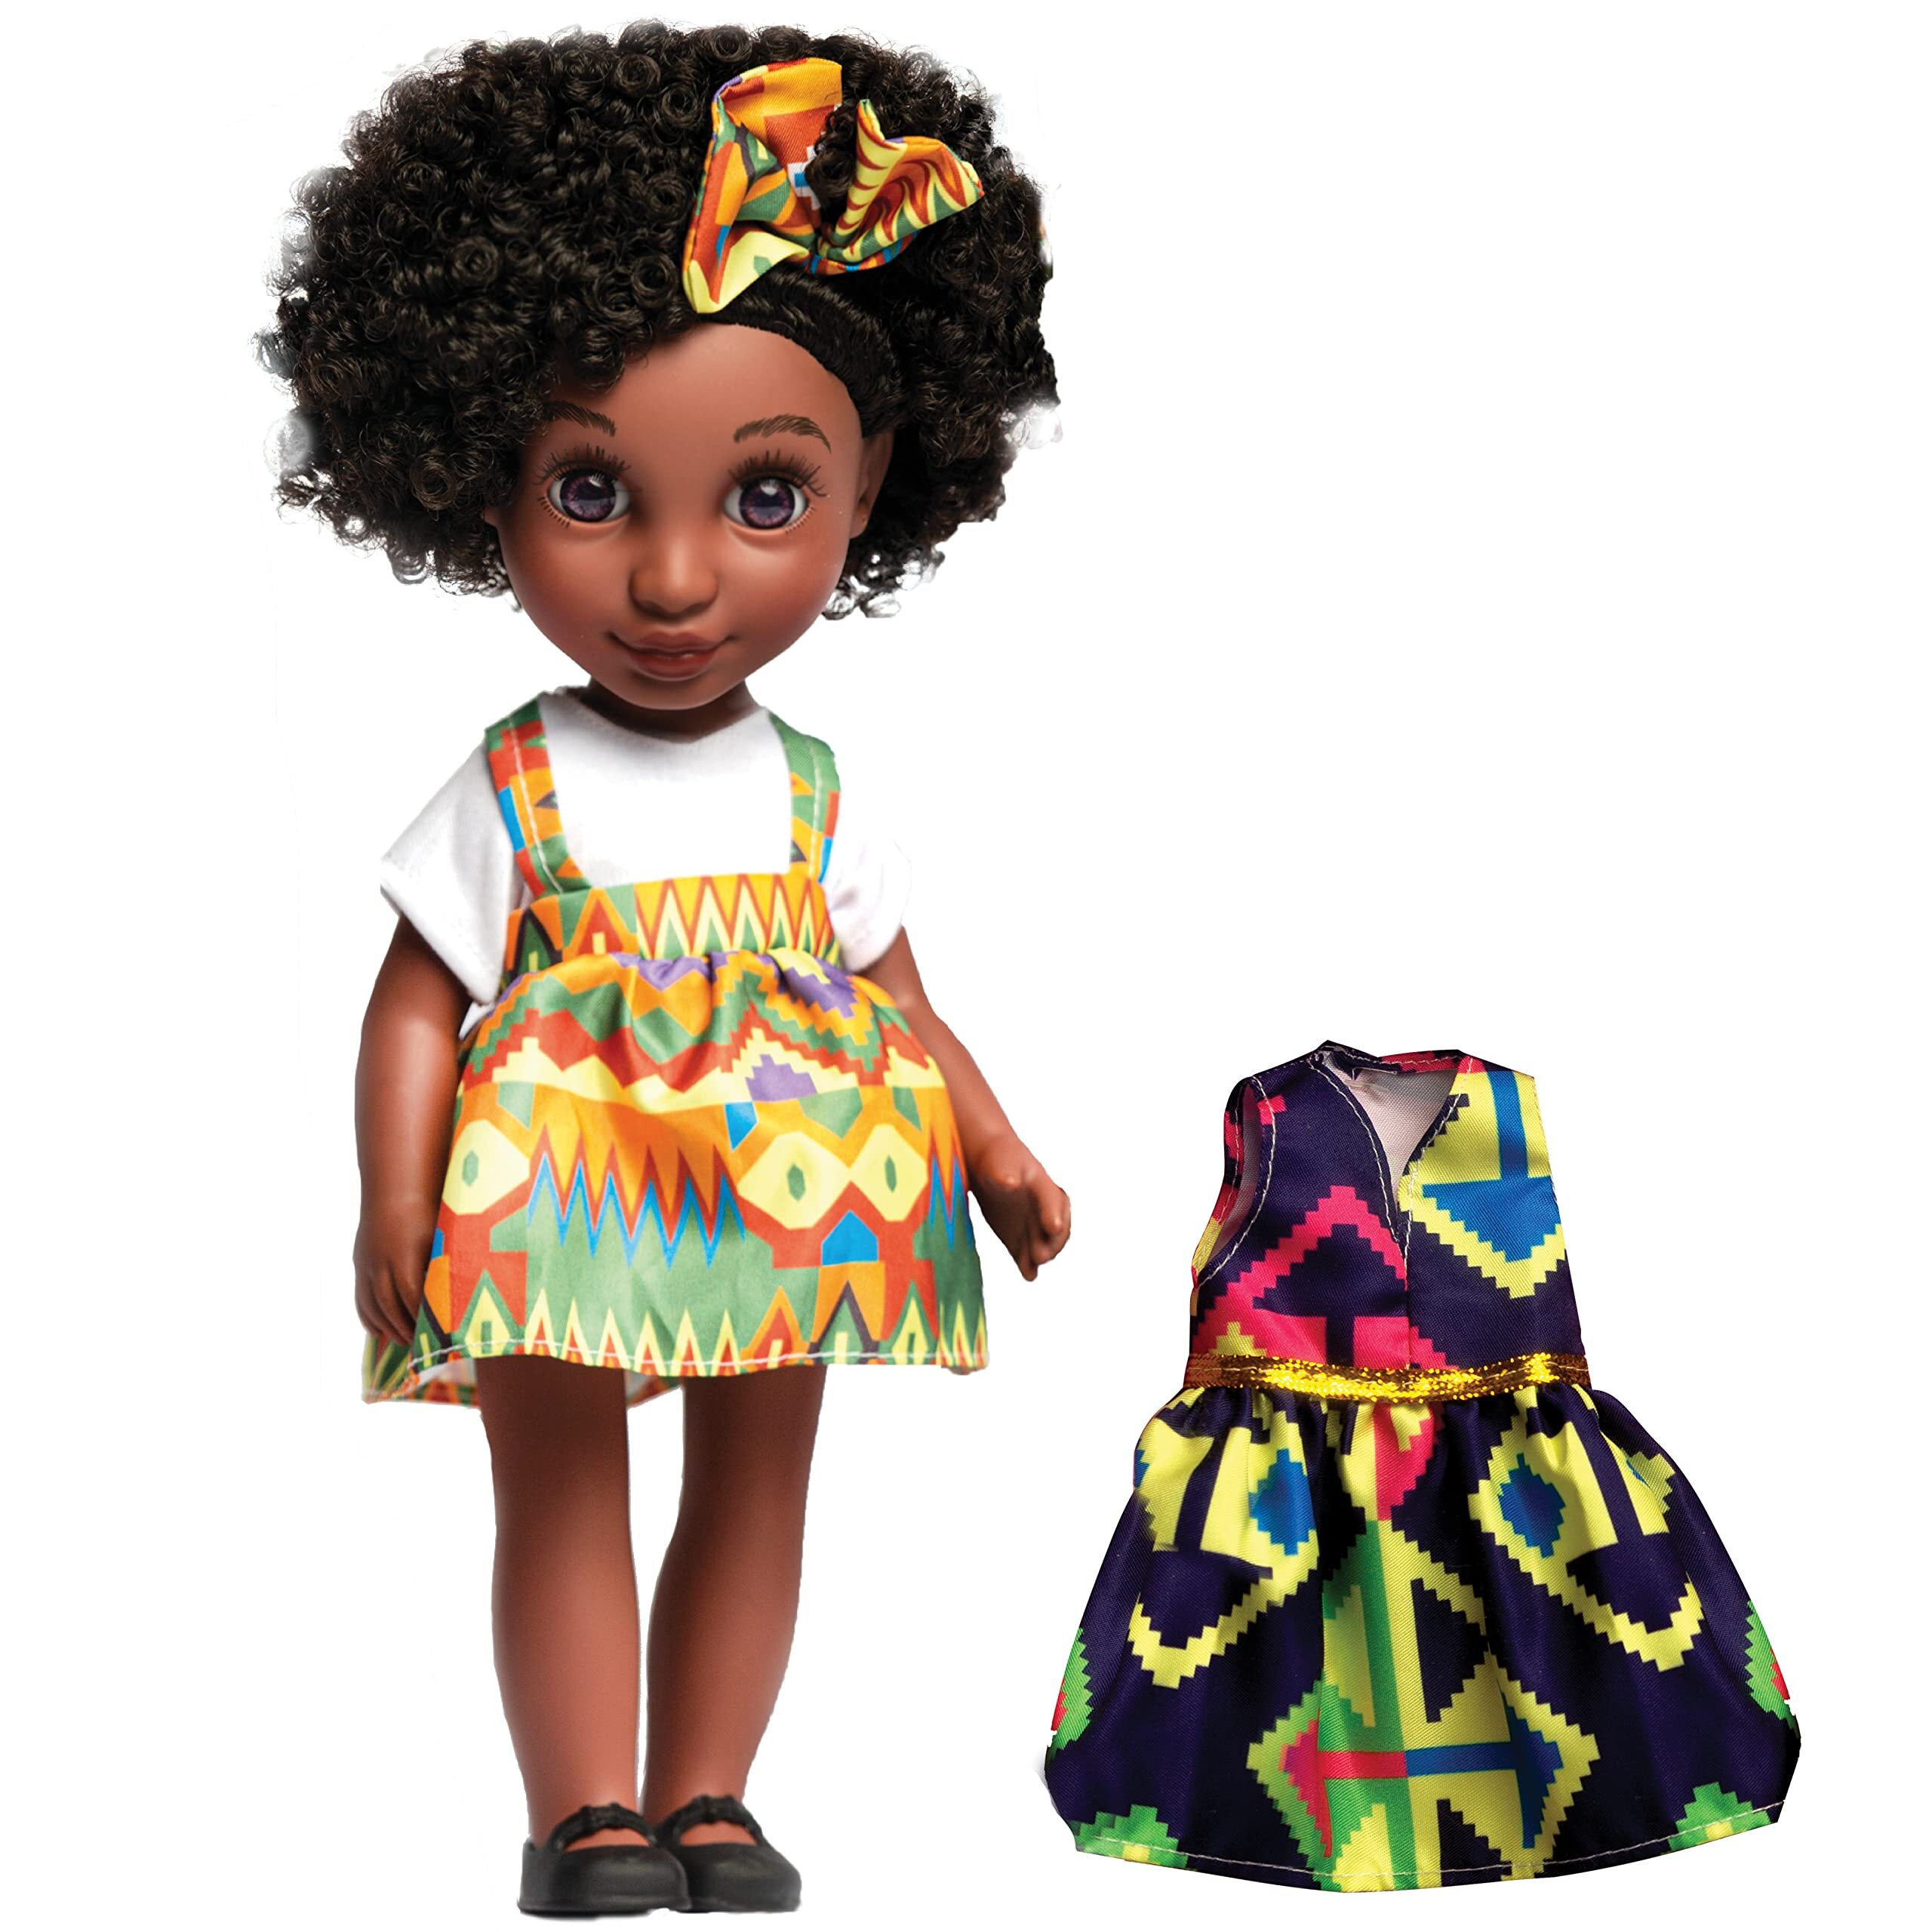 African Doll And Accessories By Naima Dolls, Aissa Black Fashion Baby Doll For Ages 3+, African Girl Dolls With Realistic Natural Hair